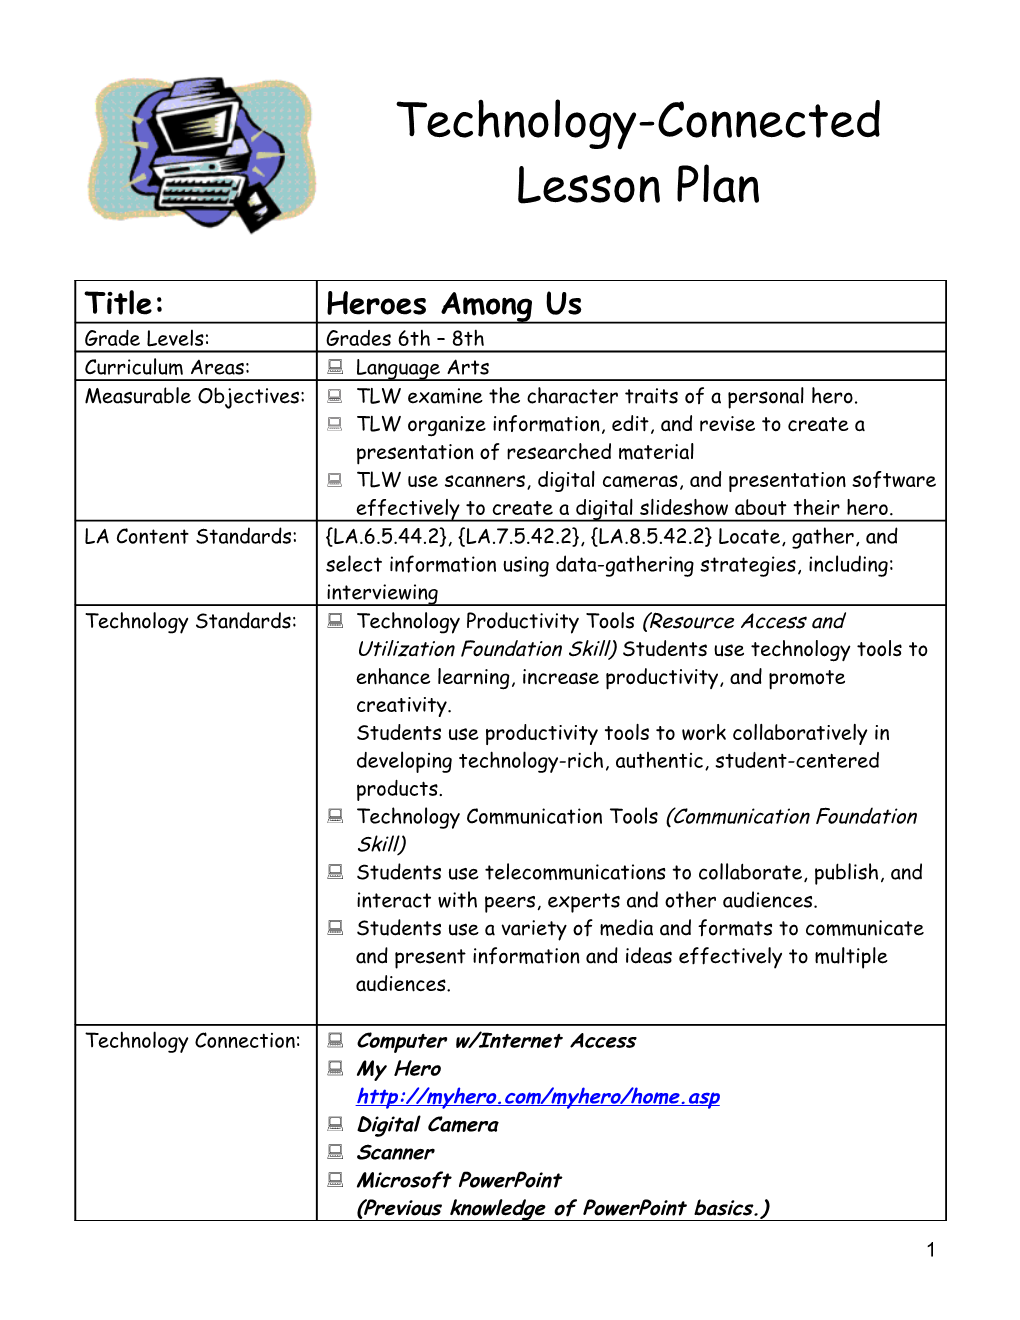 Technology-Connected Lesson Plan s6